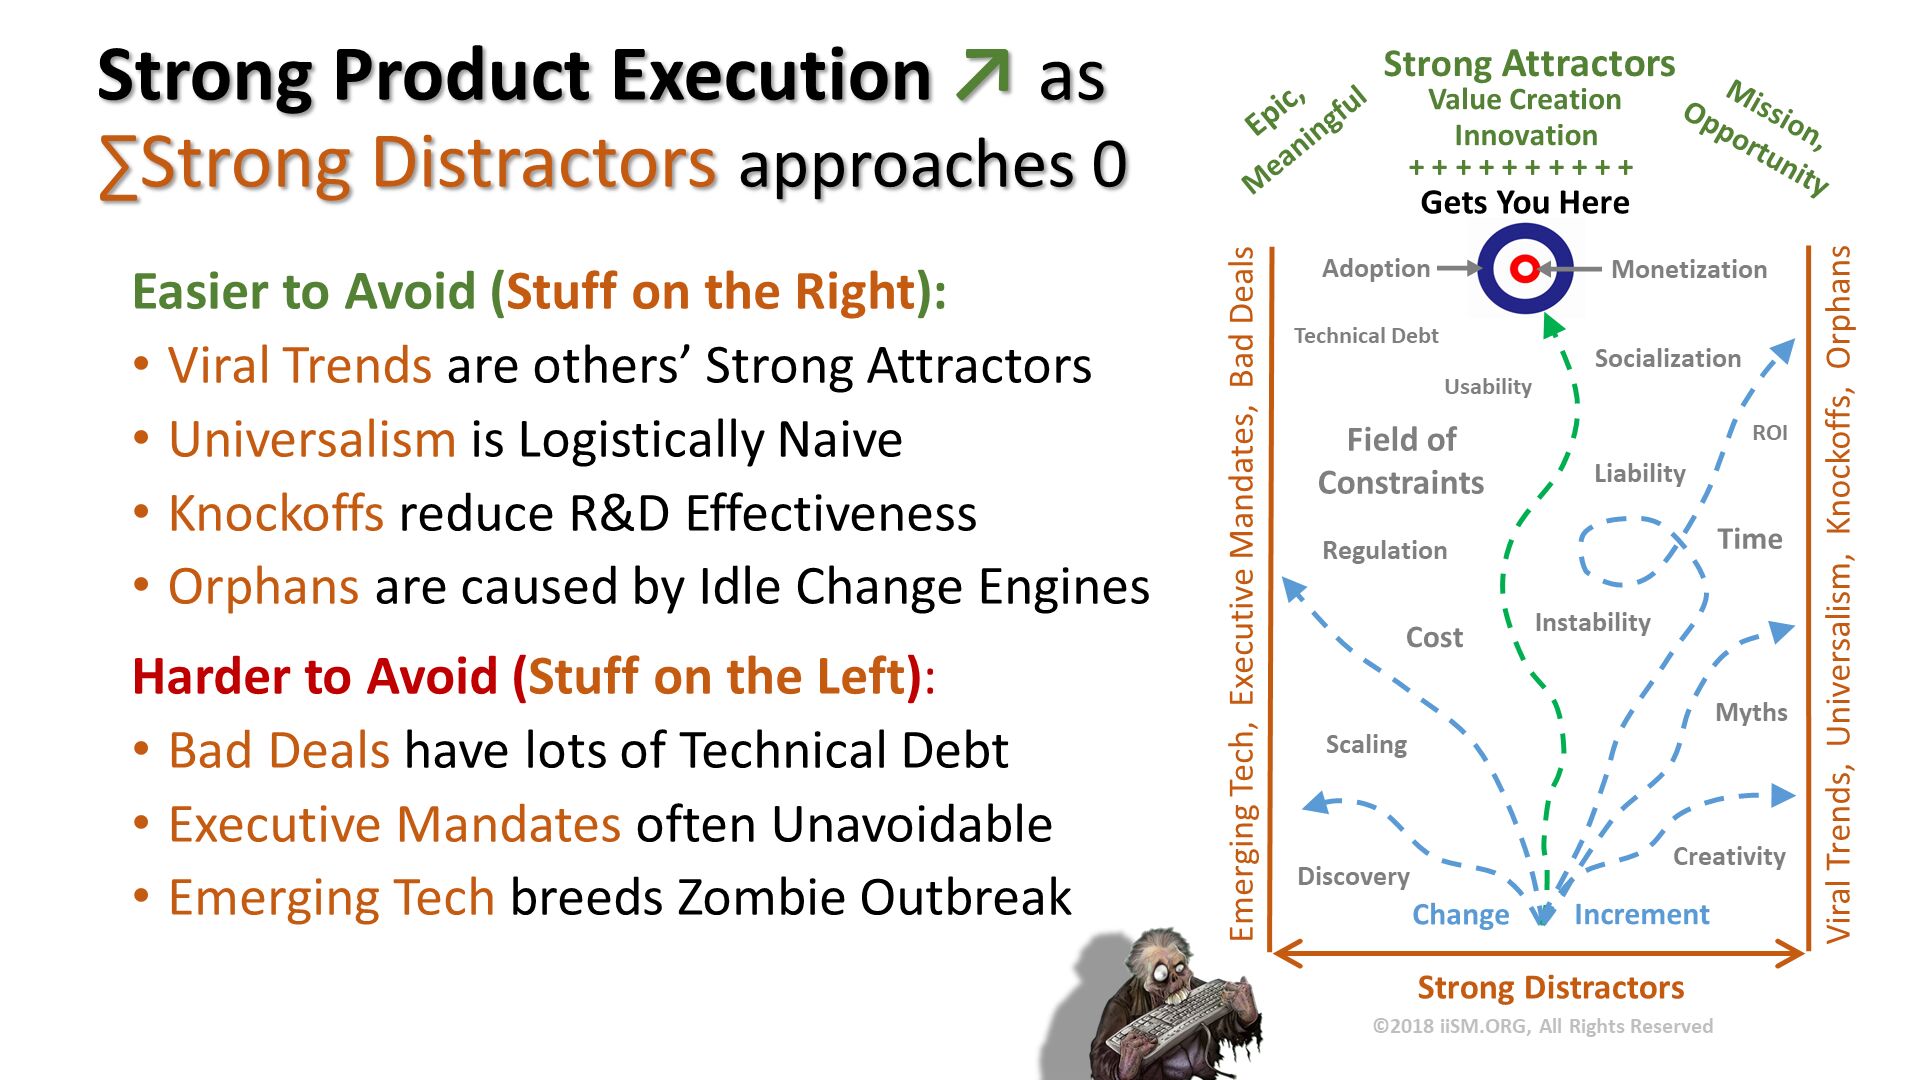 Strong Product Execution ↗ as∑Strong Distractors approaches 0. Easier to Avoid (Stuff on the Right):
Viral Trends are others’ Strong Attractors
Universalism is Logistically Naive
Knockoffs reduce R&D Effectiveness
Orphans are caused by Idle Change Engines
Harder to Avoid (Stuff on the Left):
Bad Deals have lots of Technical Debt
Executive Mandates often Unavoidable
Emerging Tech breeds Zombie Outbreak
. 